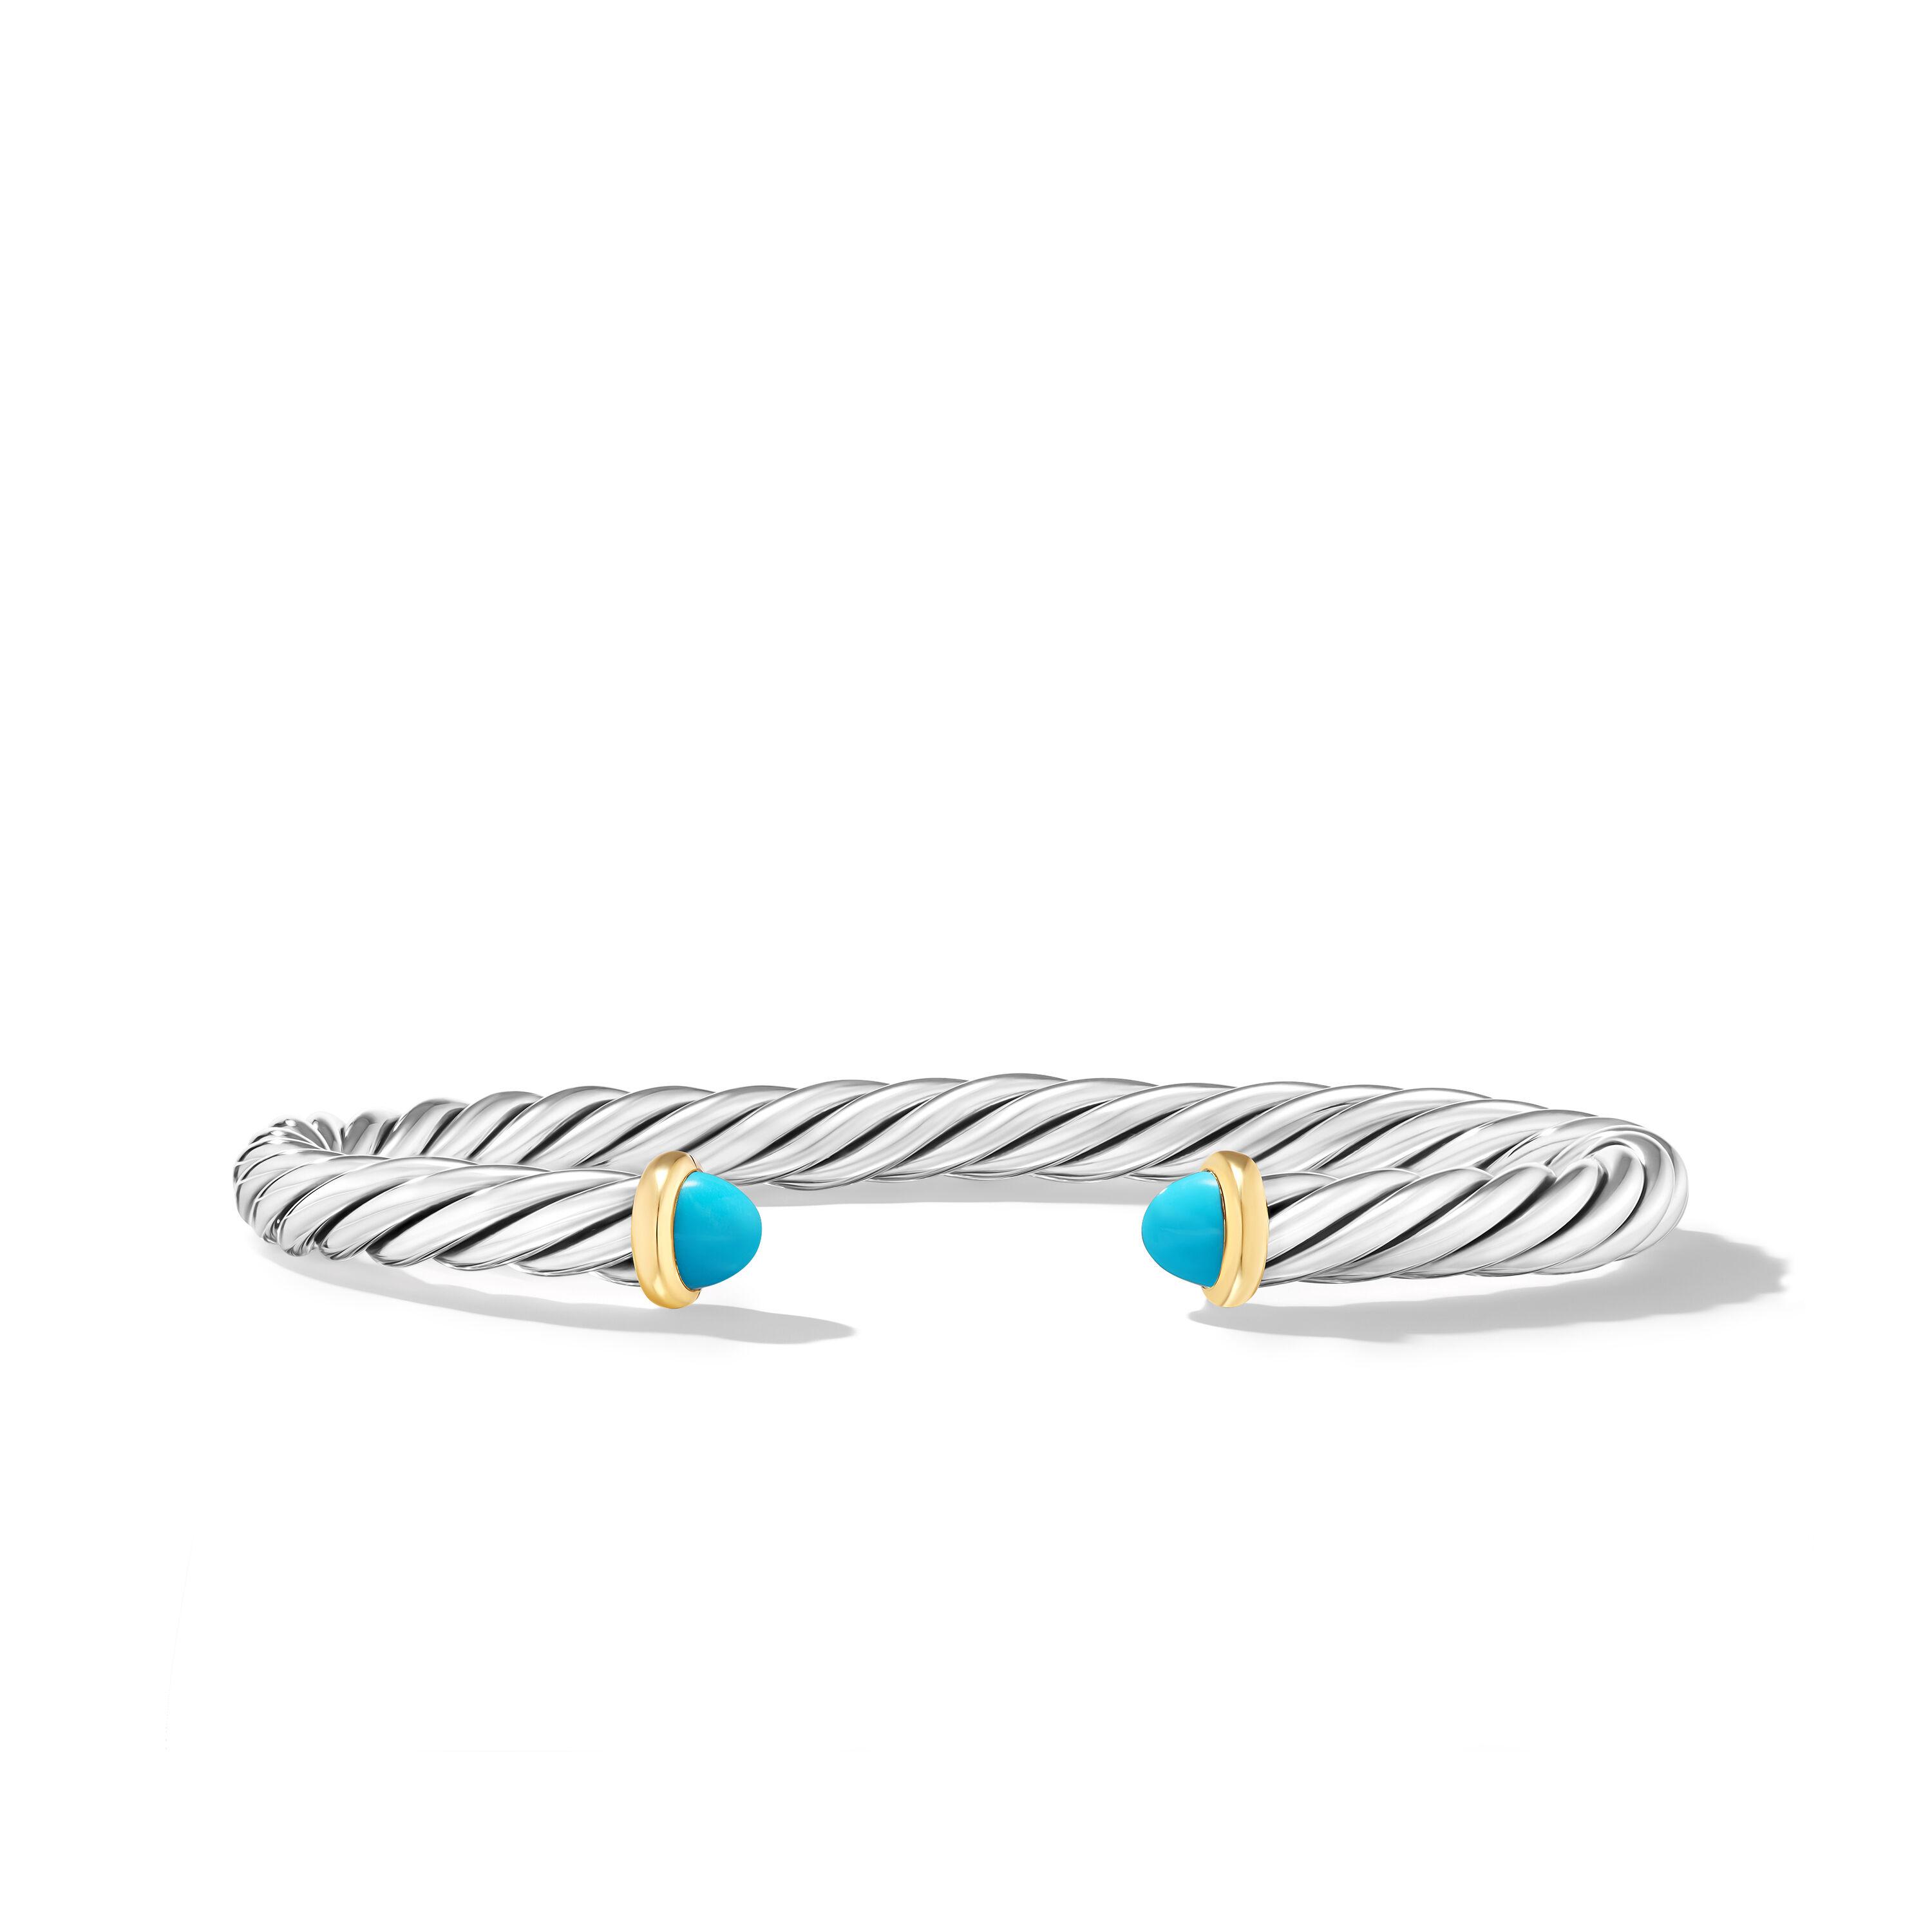 David Yurman 6mm Cable Cuff Bracelet in Sterling Silver with 14K Yellow Gold and Turquoise, Medium